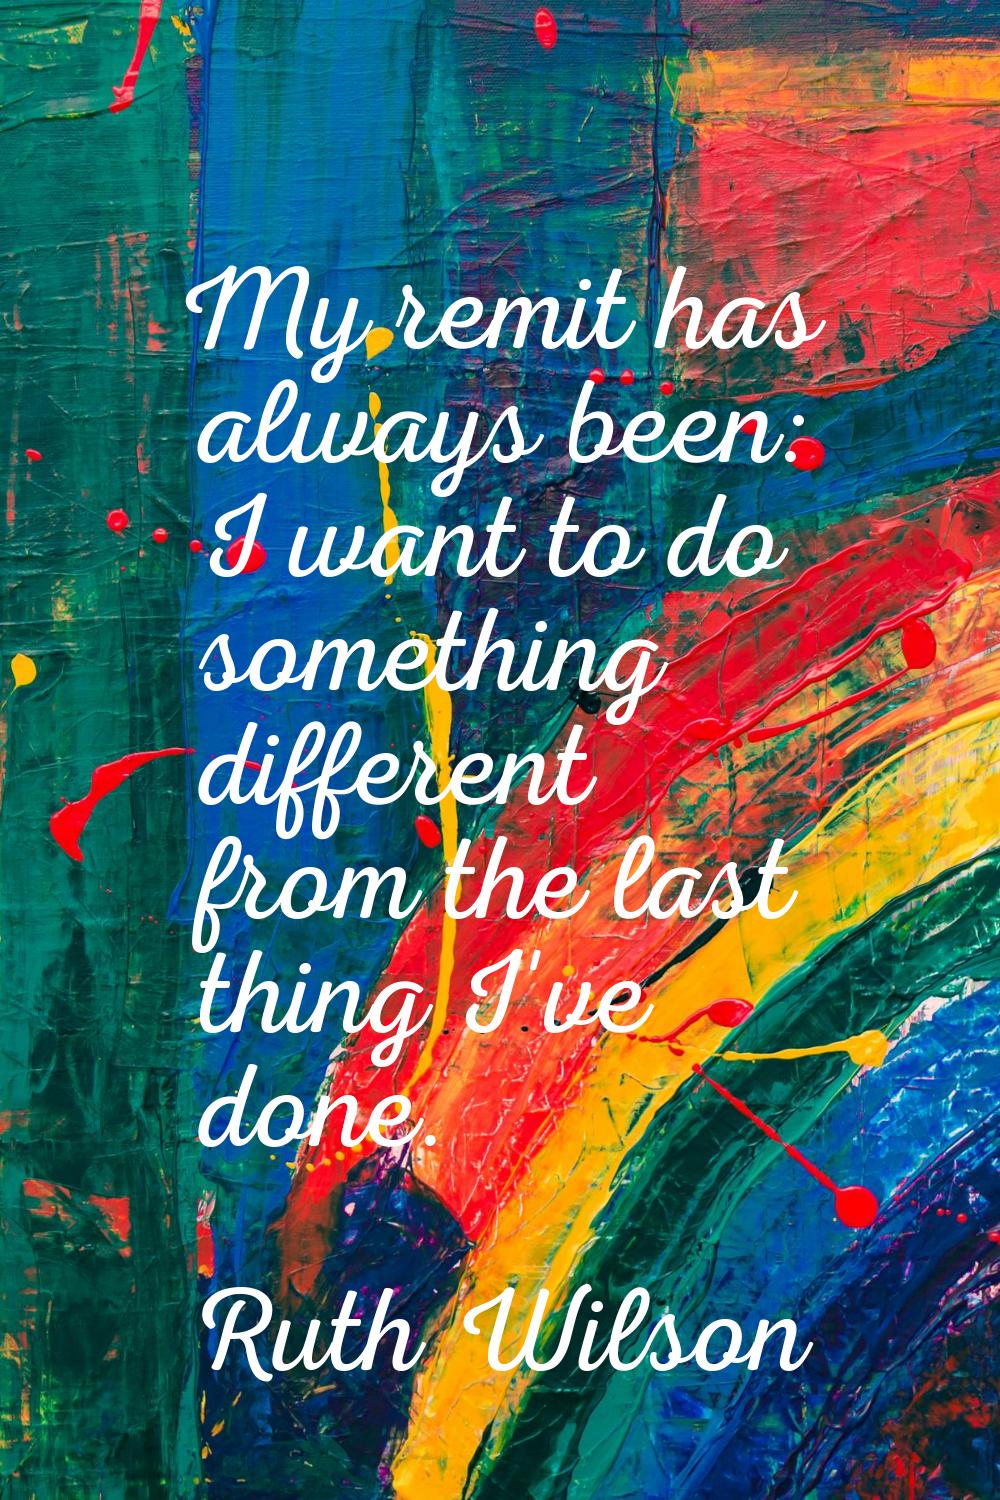 My remit has always been: I want to do something different from the last thing I've done.